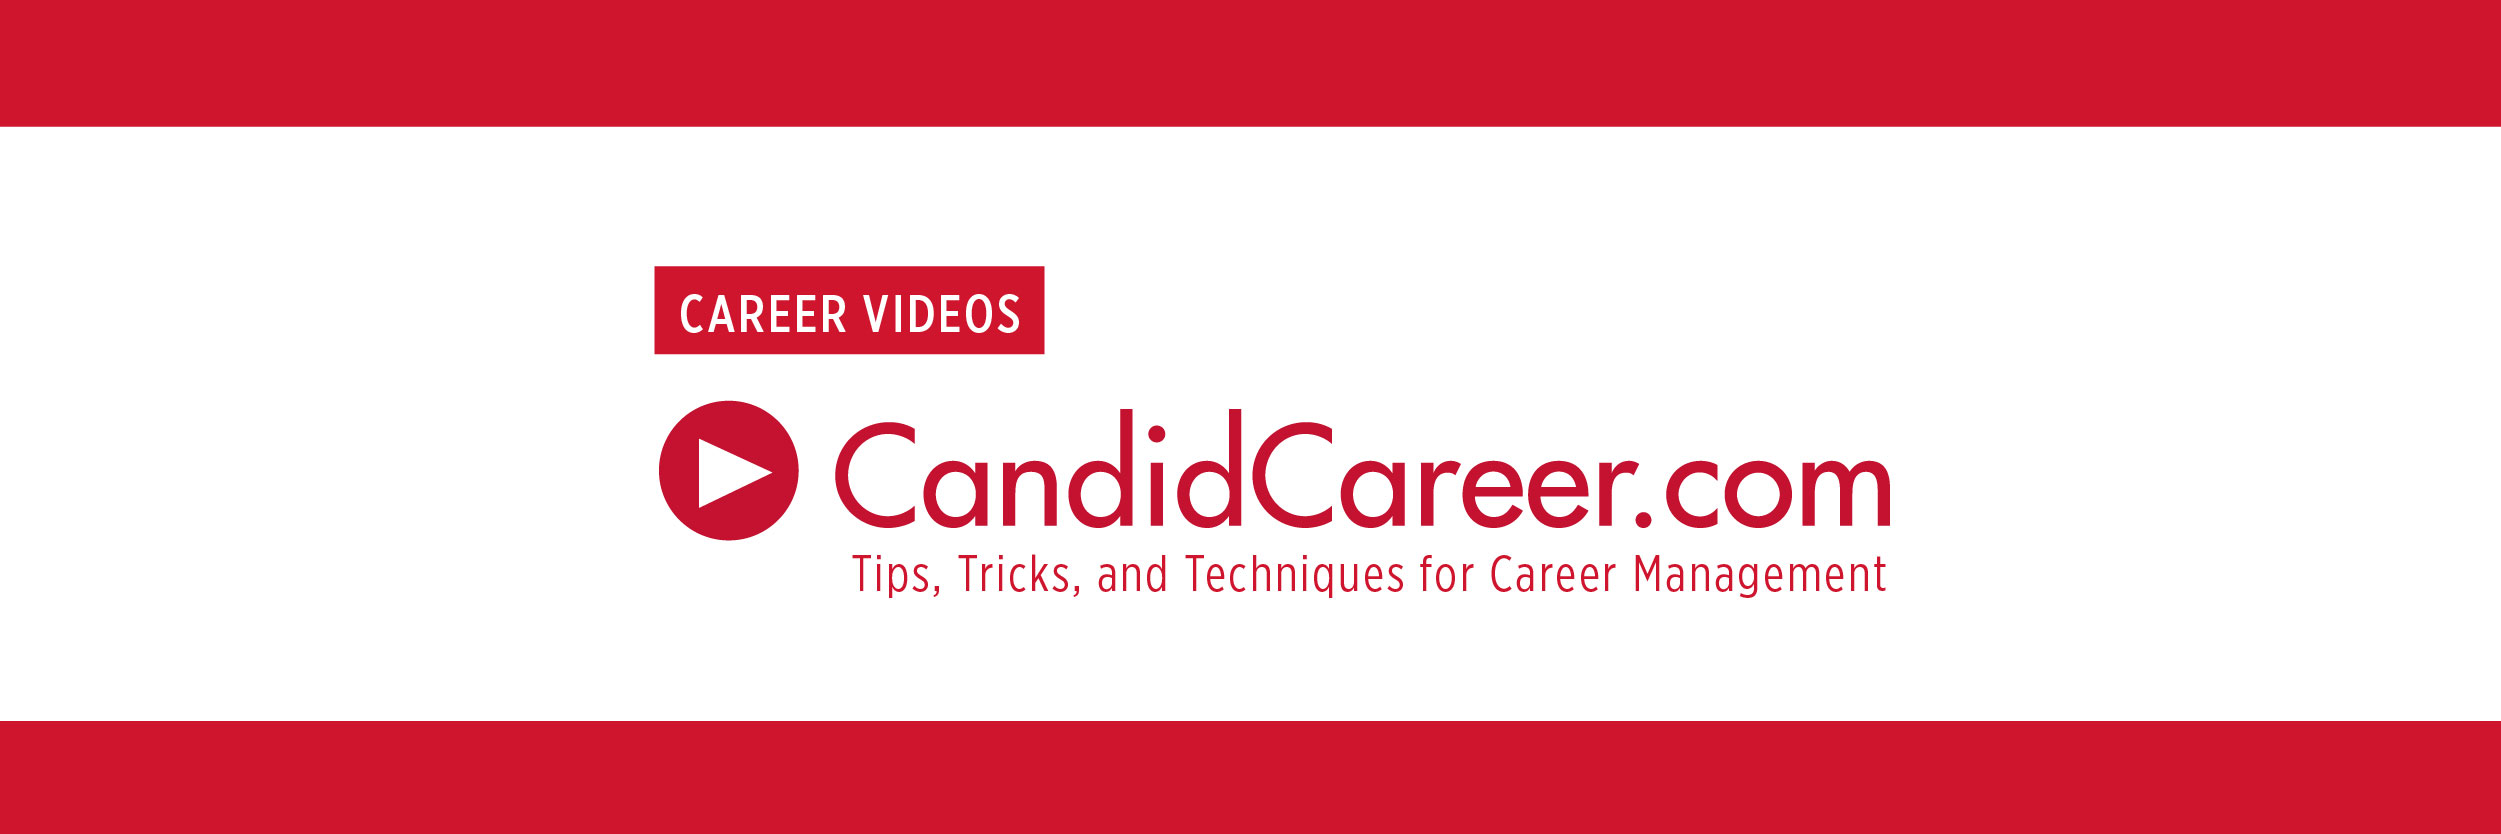 Candid Careers - tips and tricks for career management